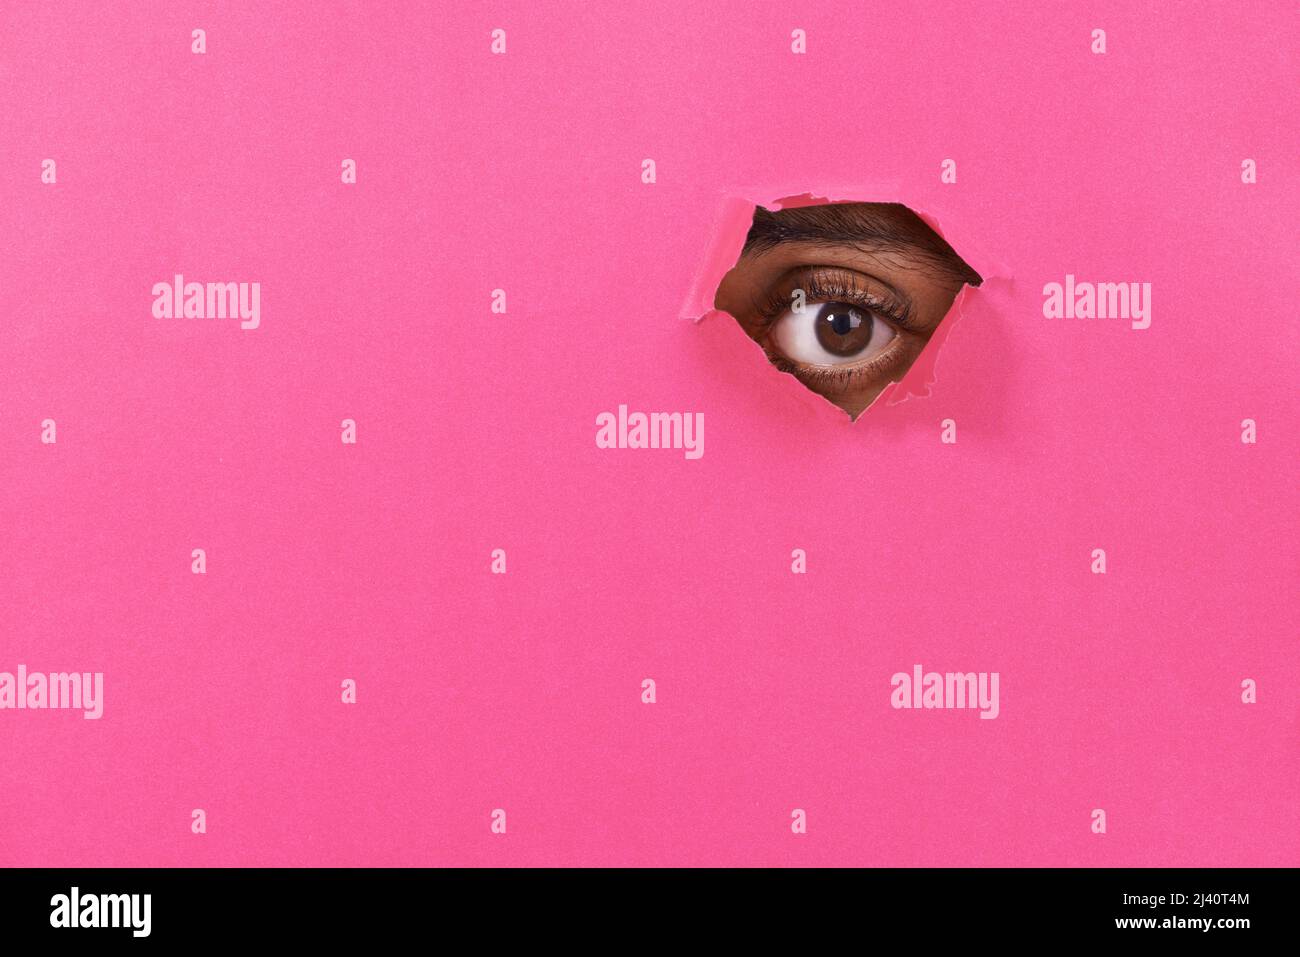 I see you. A view of a mans eye looking through a hole in some colorful paper. Stock Photo